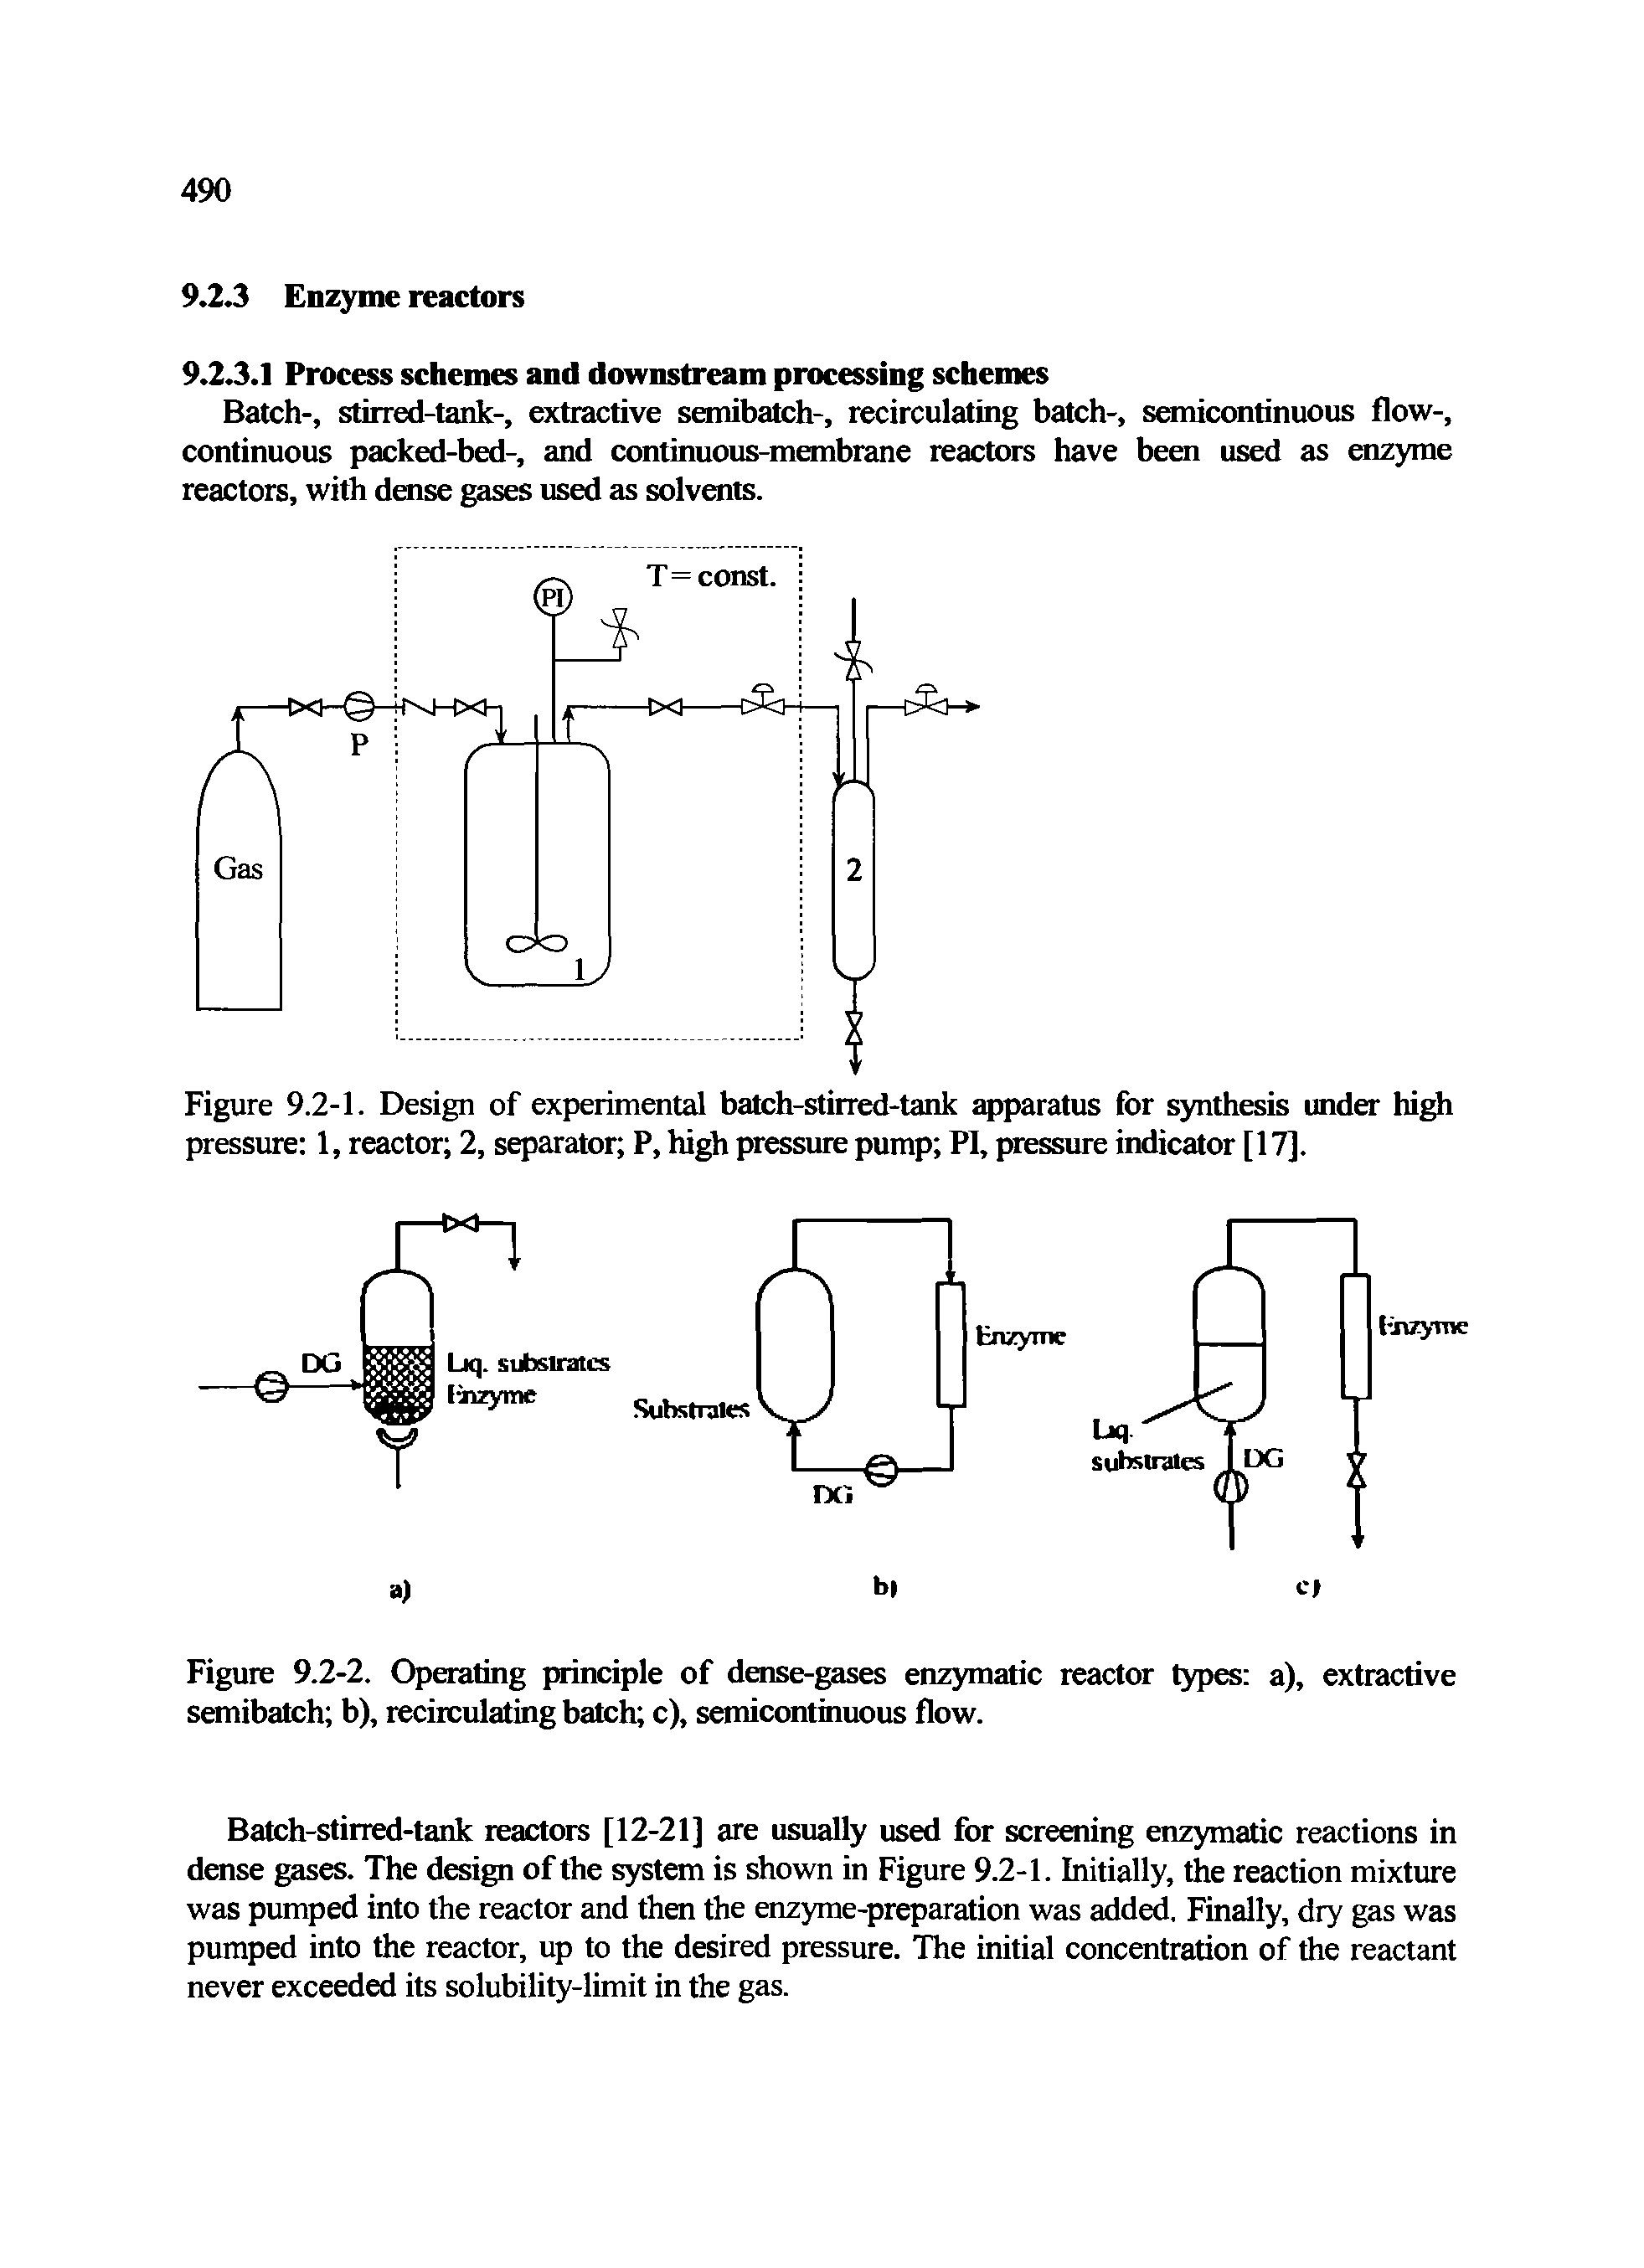 Figure 9.2-1. Design of experimental batch-stirred-tank apparatus for synthesis under high pressure 1, reactor 2, separator P, high pressure pump PI, pressure indicator [17].